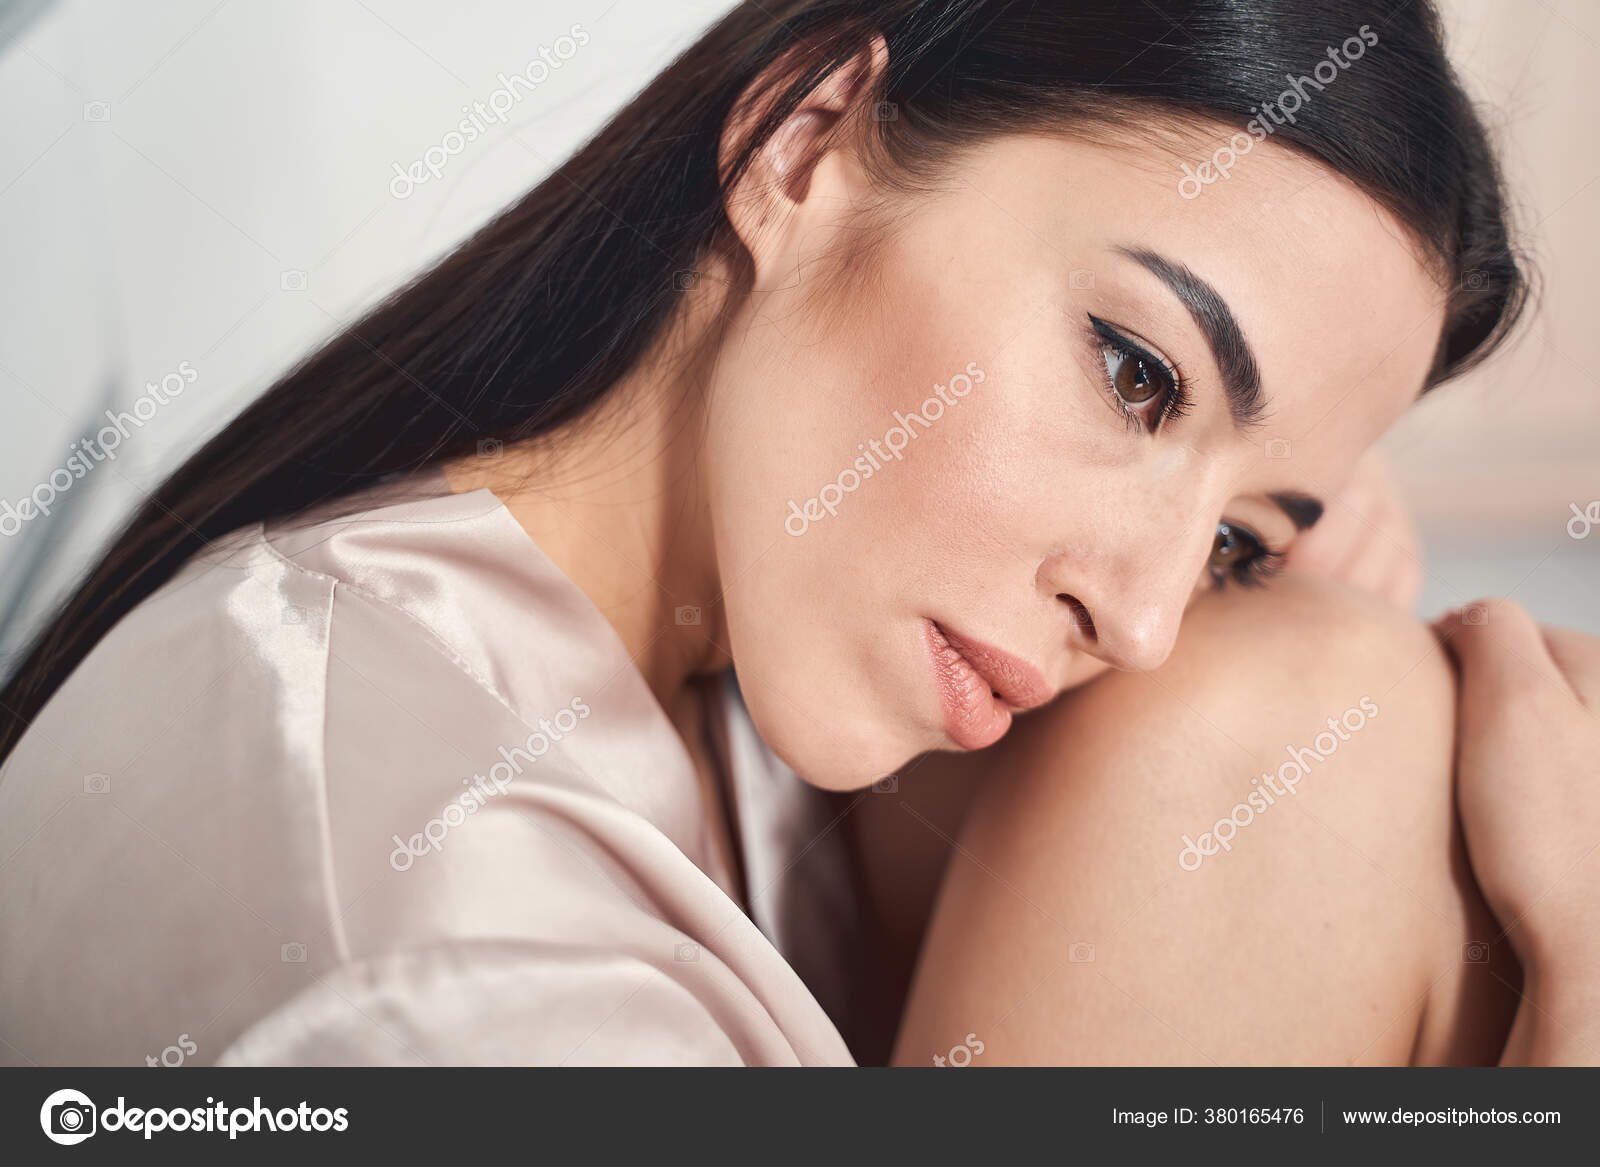 Missing someone Stock Photos, Royalty Free Missing someone Images ...